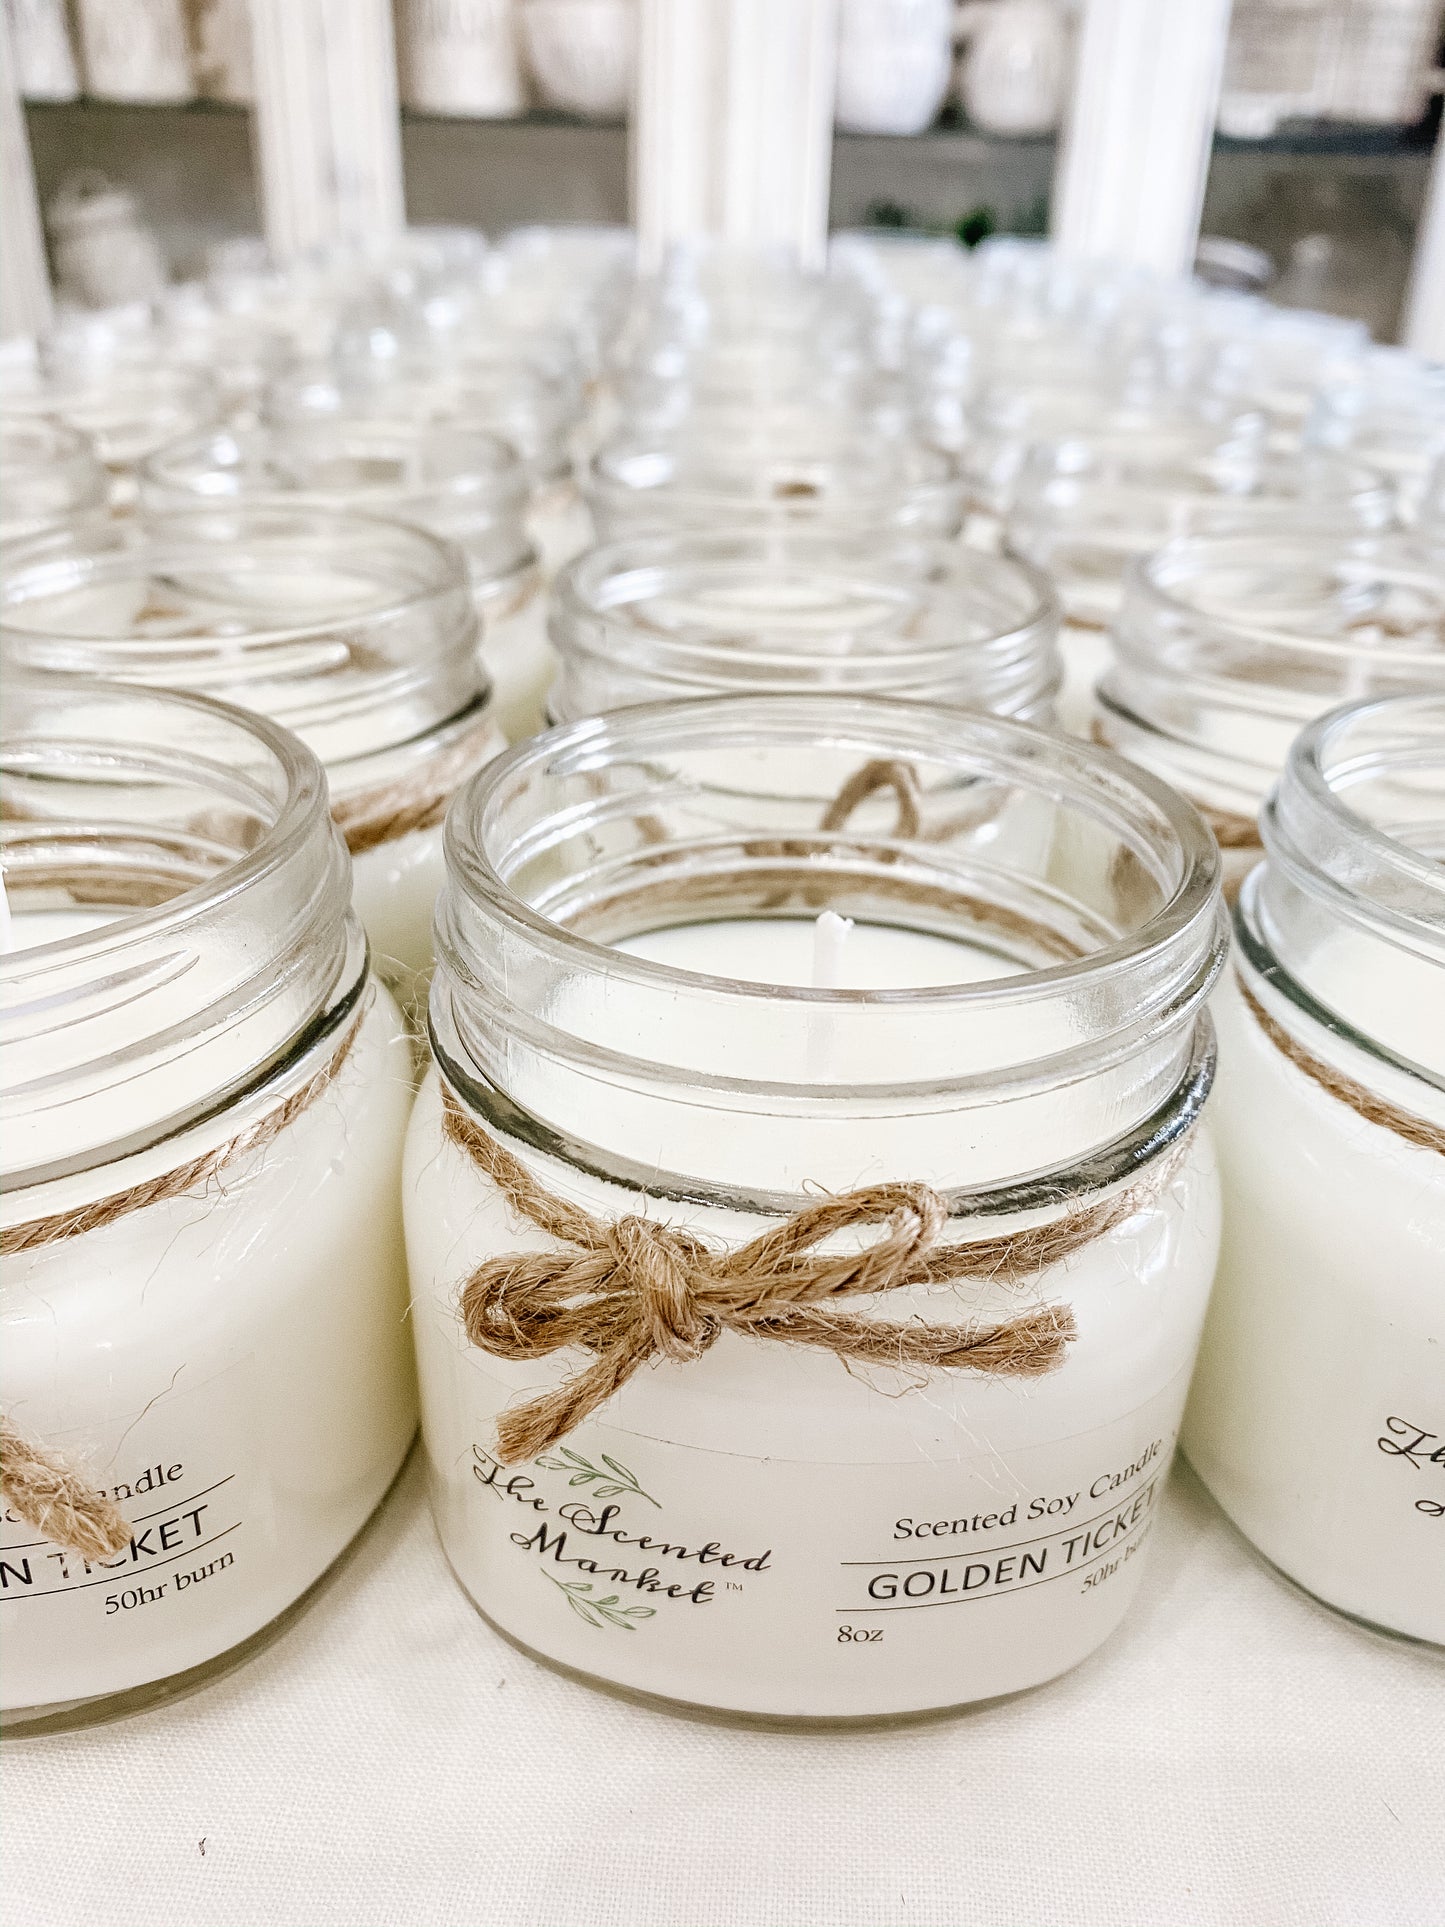 The GOLDEN TICKET Soy Wax Candle